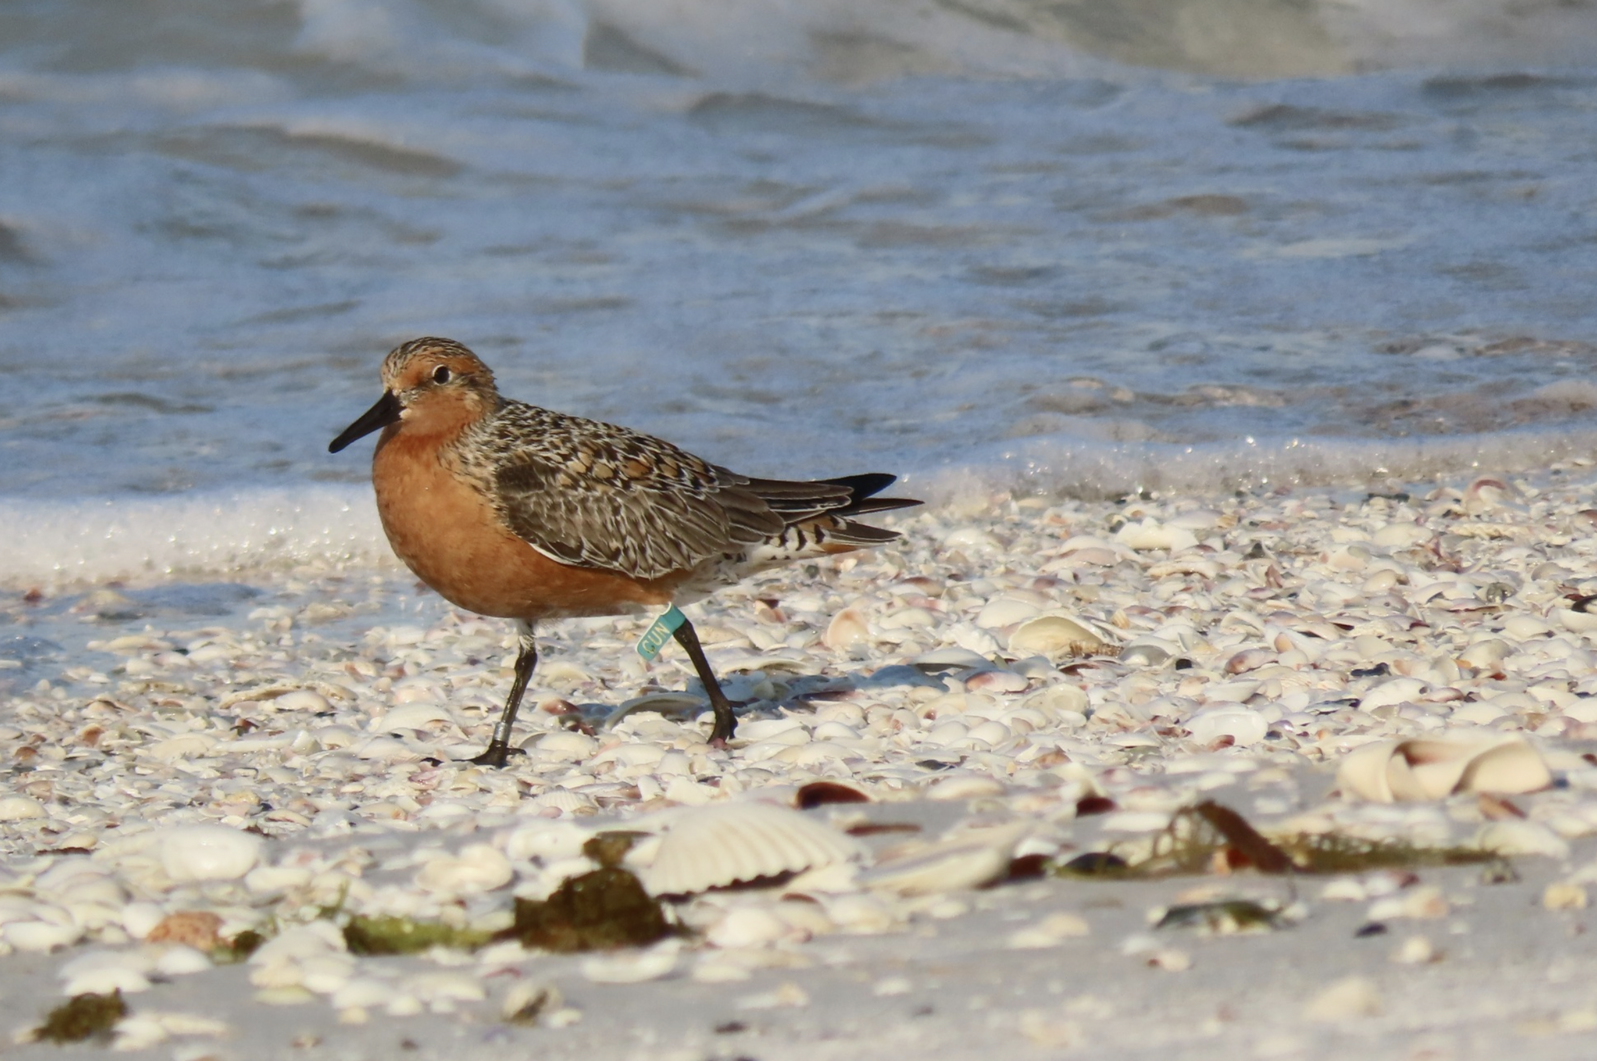 Red Knot standing on the beach, with a green band visible.